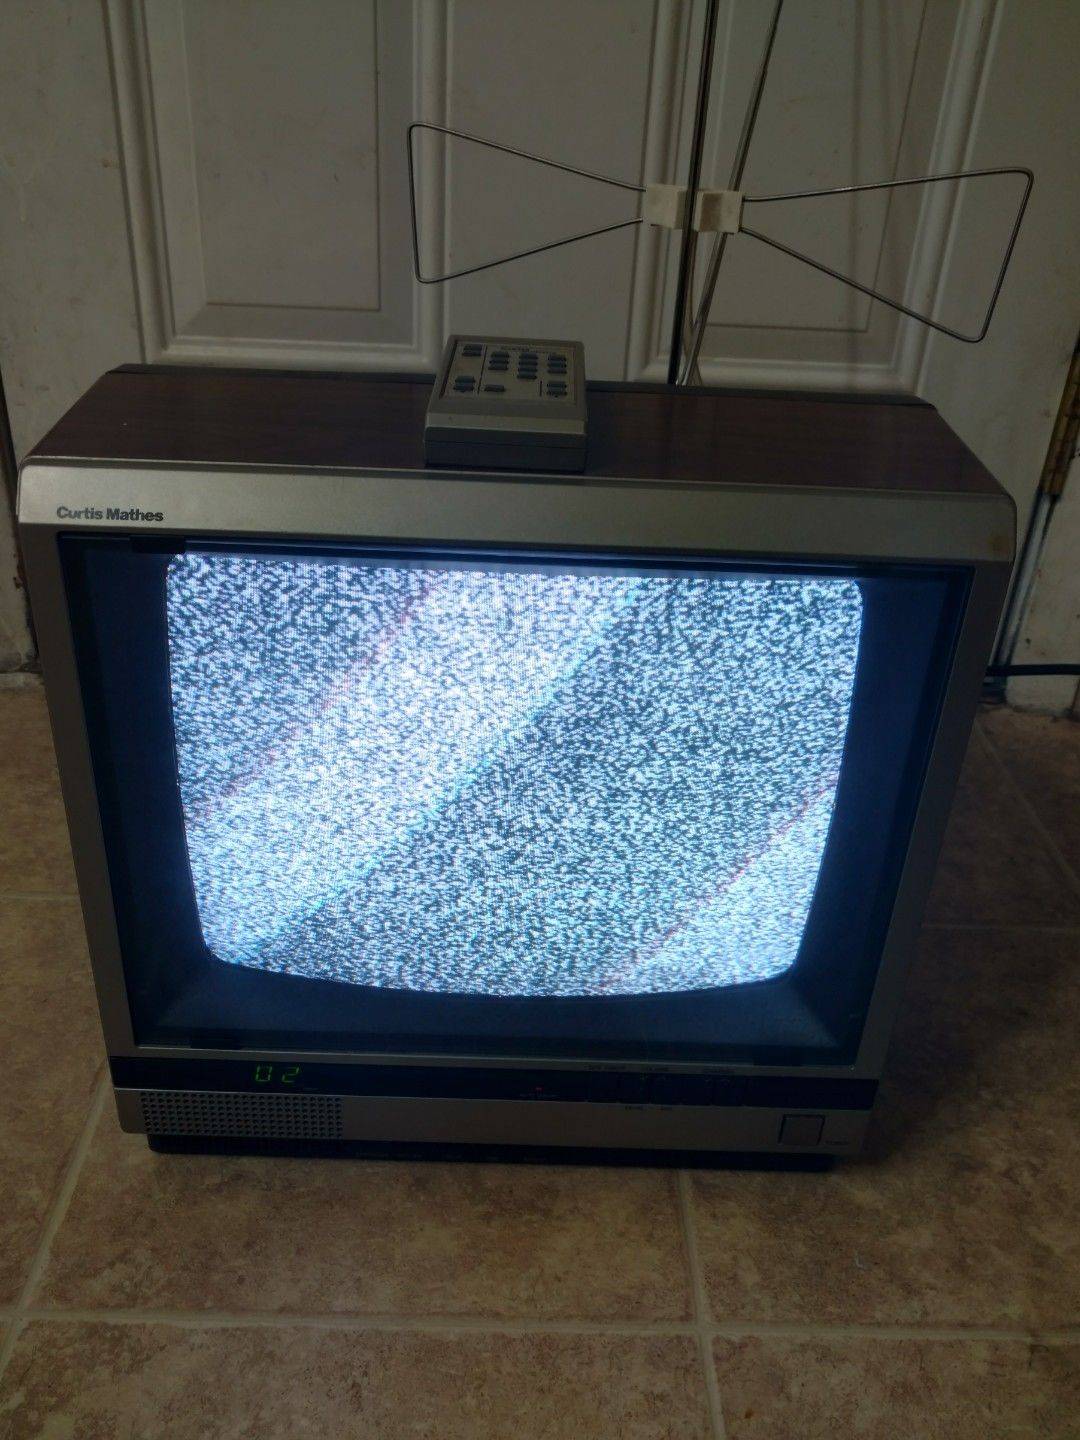 Curtis Mathes K1370RW Color Television